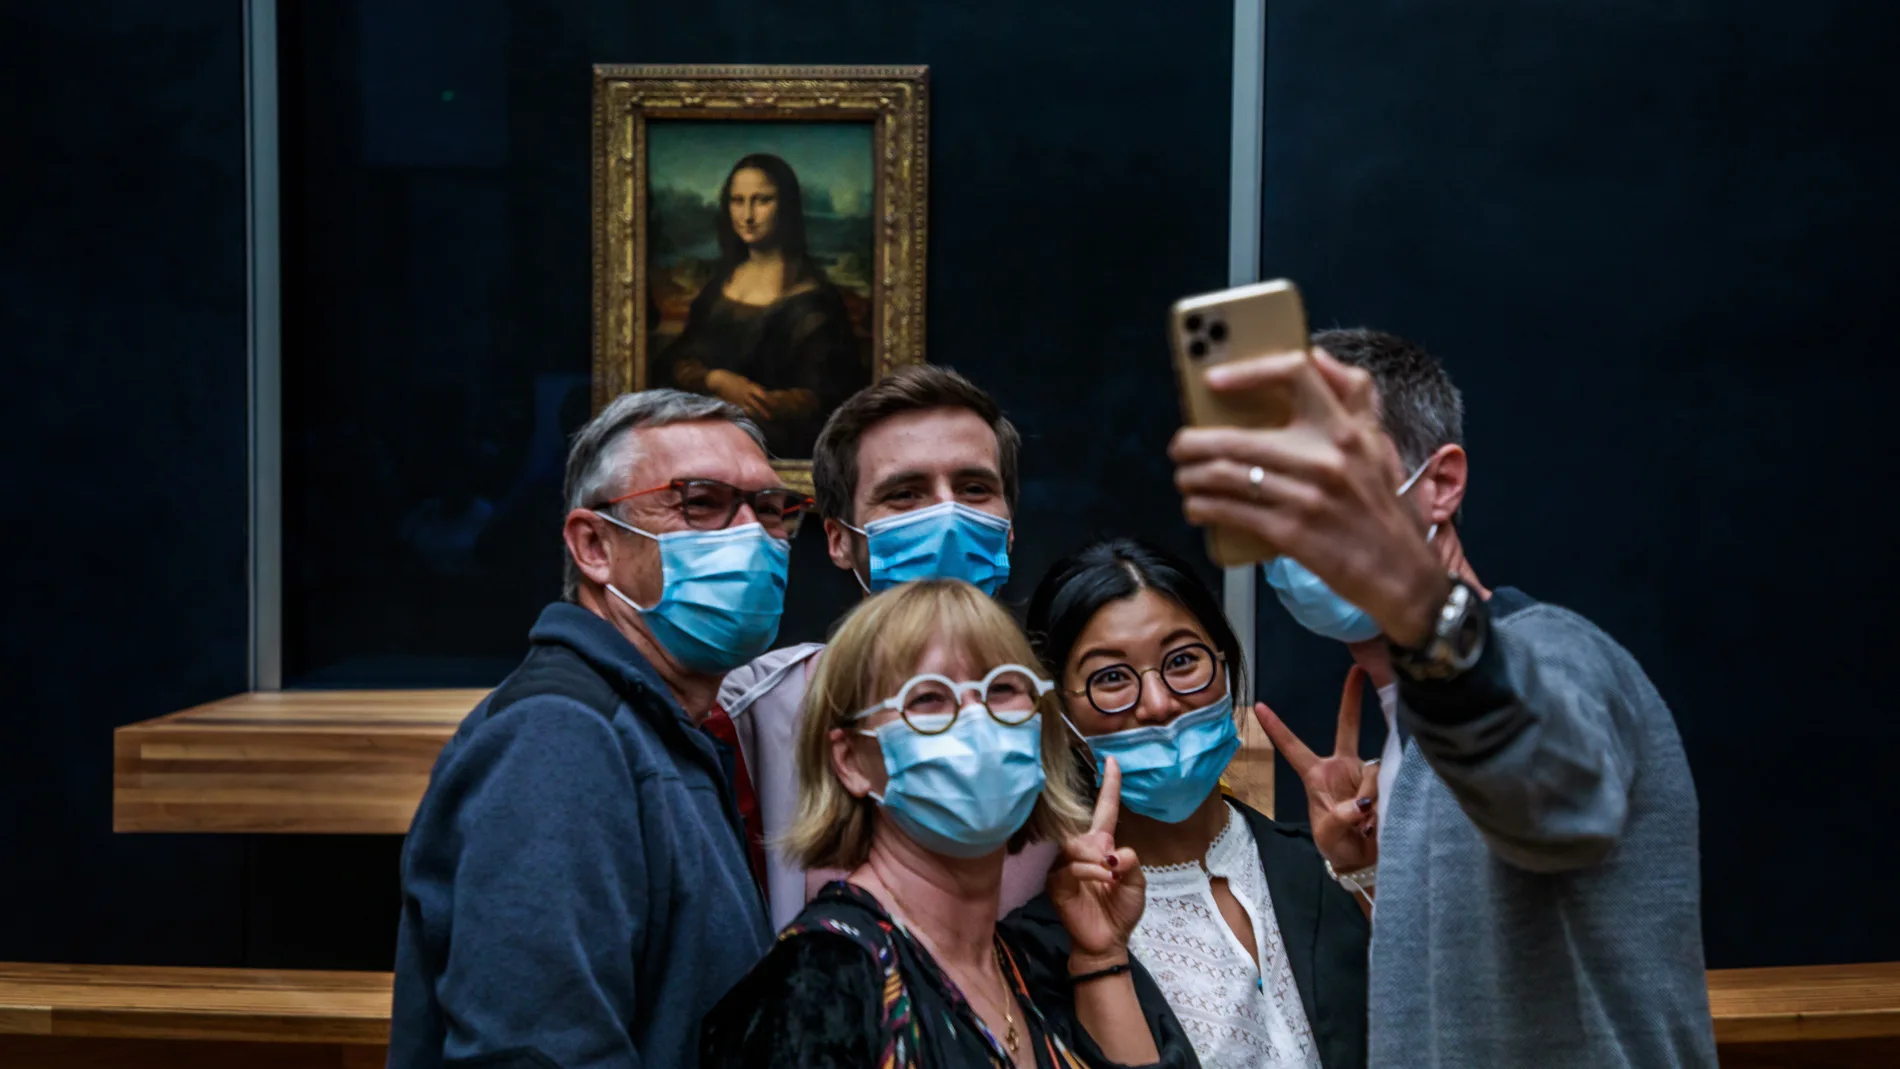 The Louvre Museum reopens to public